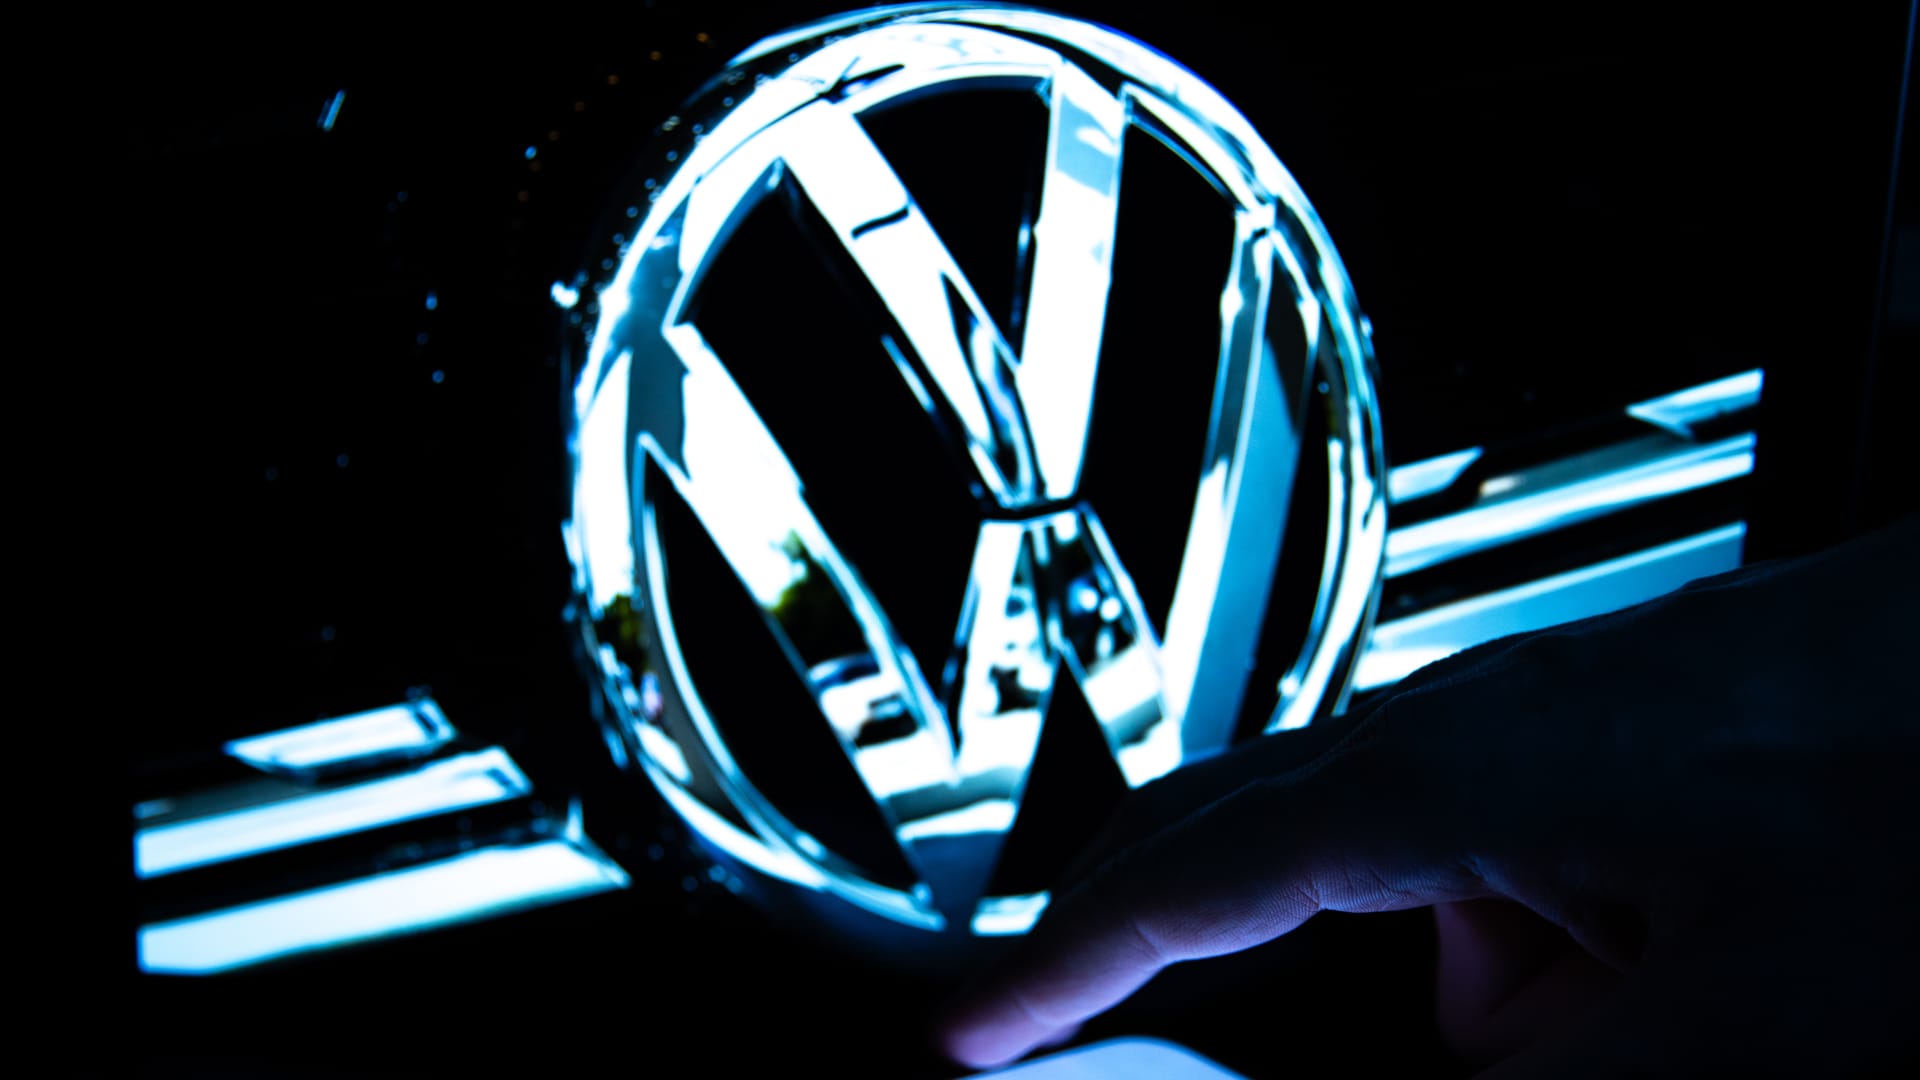 Volkswagen sets up its own AI lab as car industry looks to embrace the tech